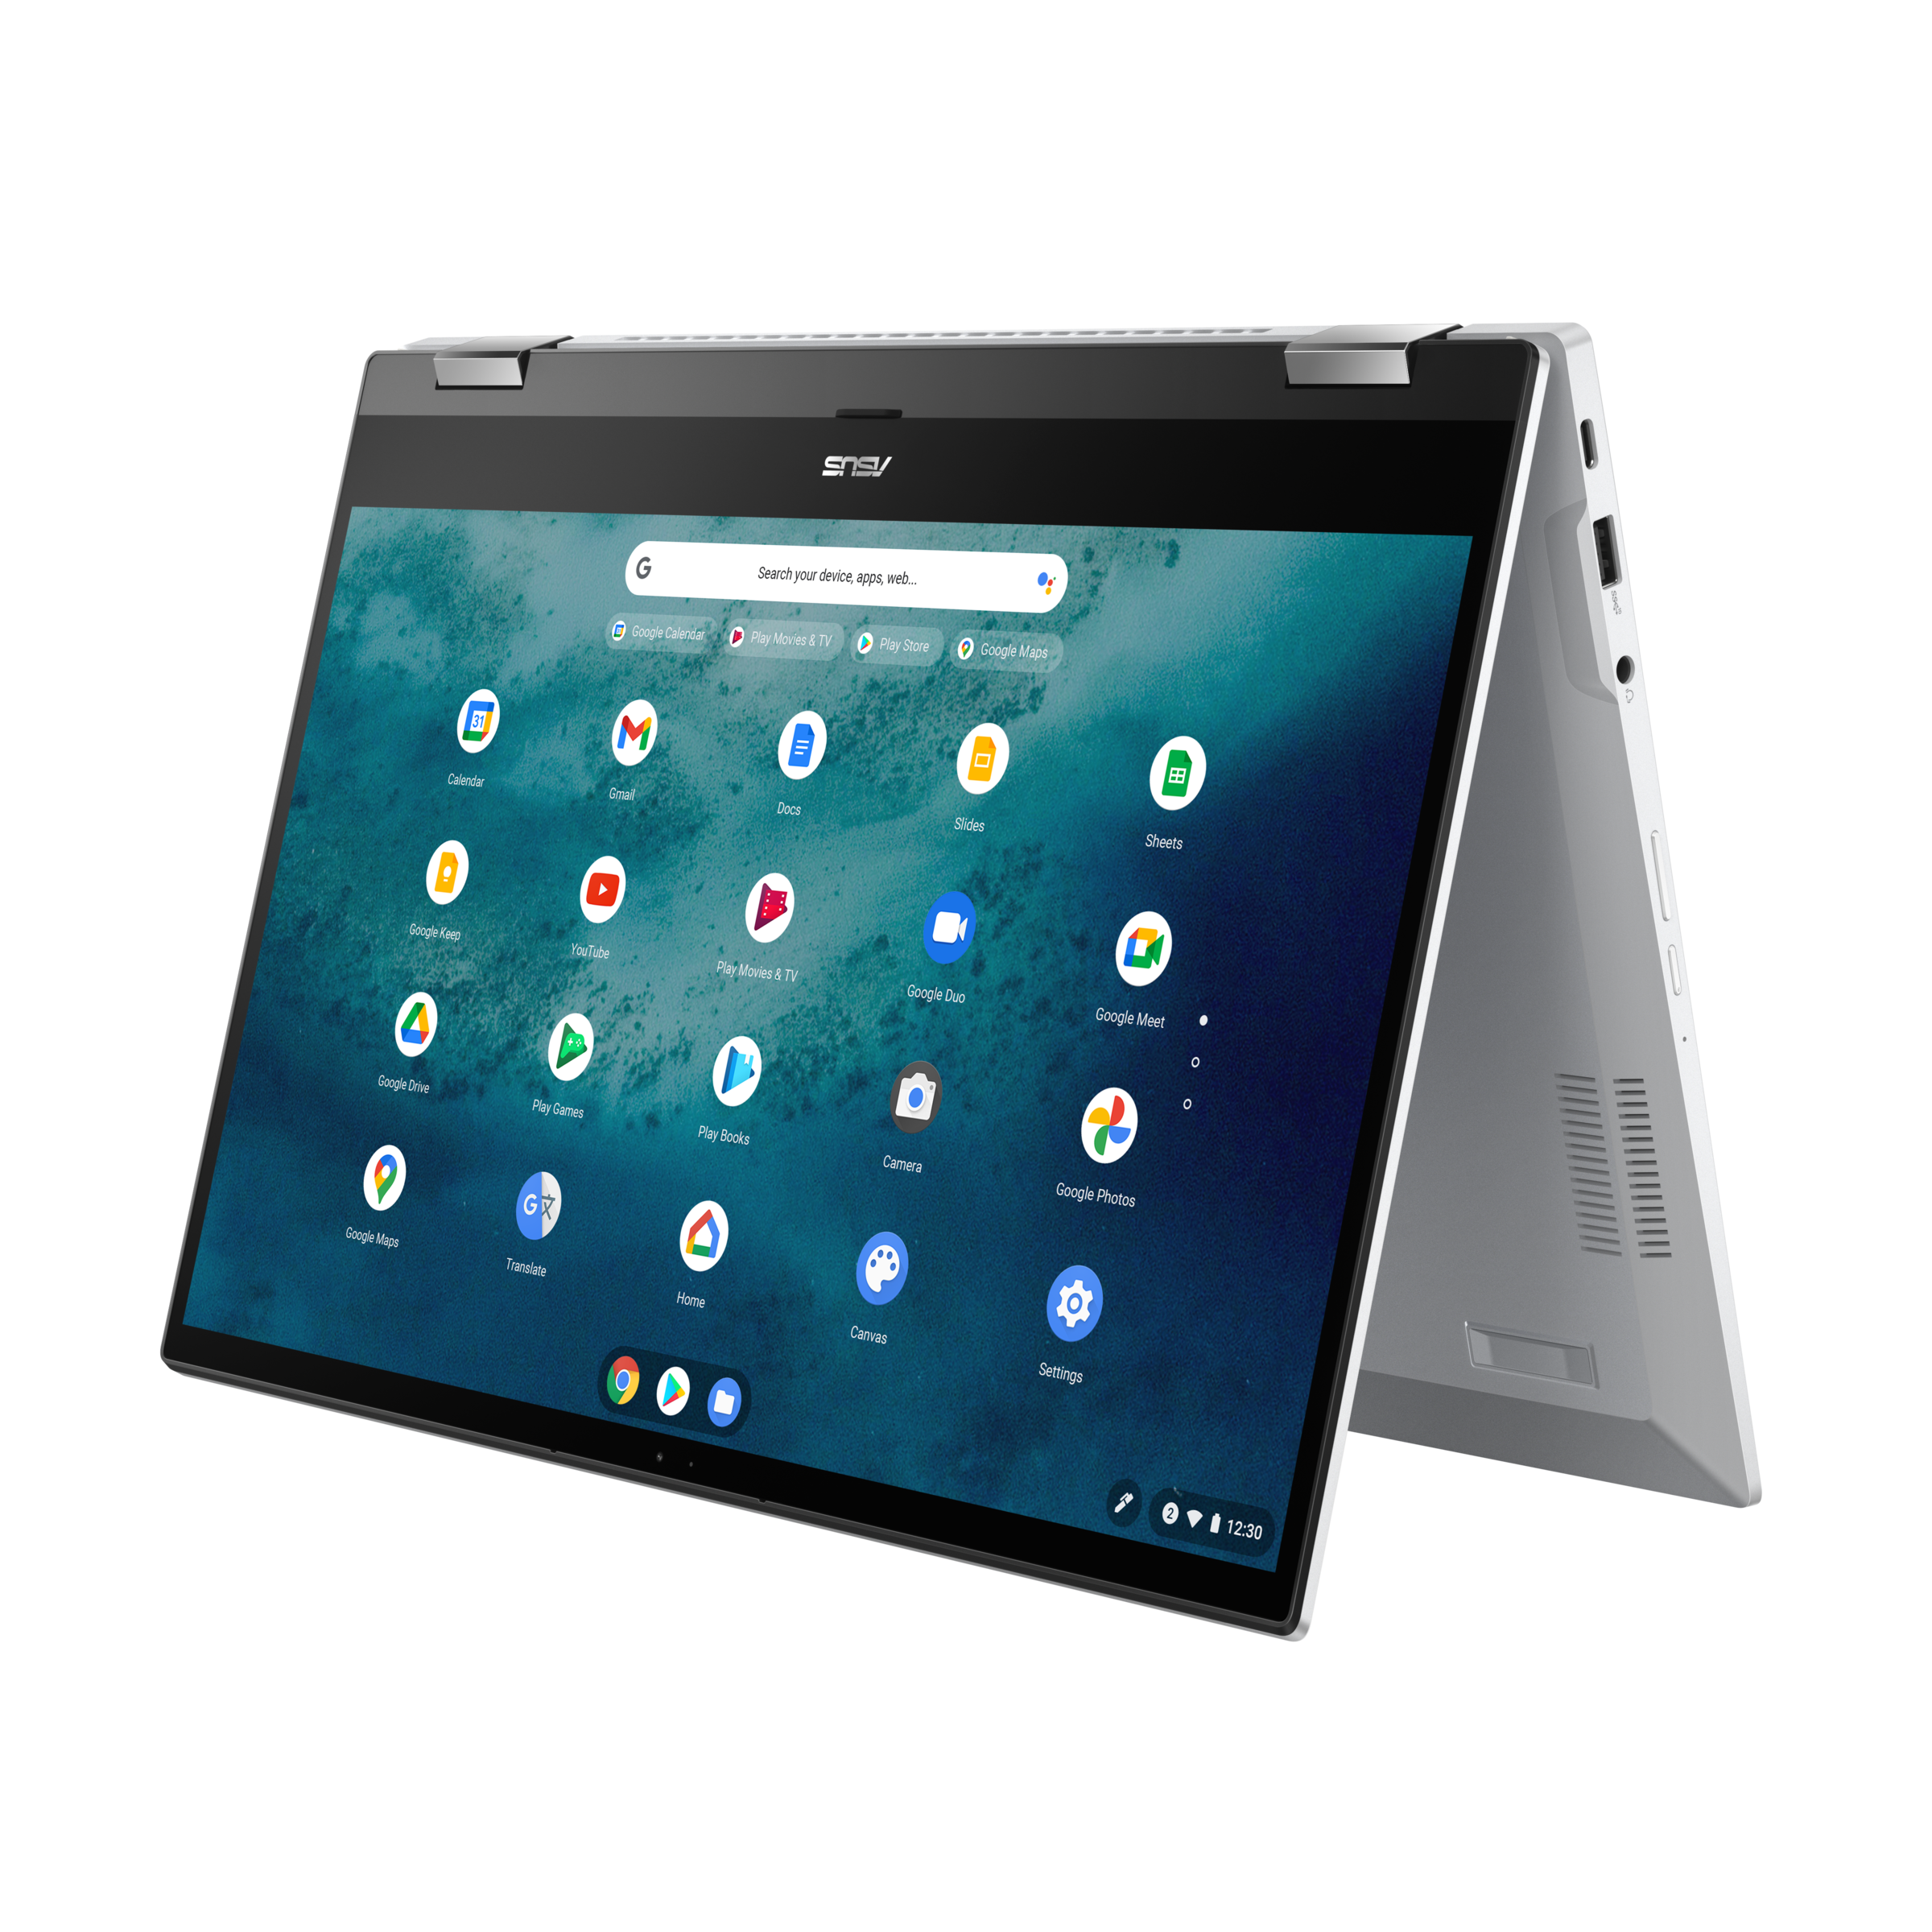 ASUS Chromebook Flip CX5 (CX5500)｜Laptops For Home｜ASUS Global